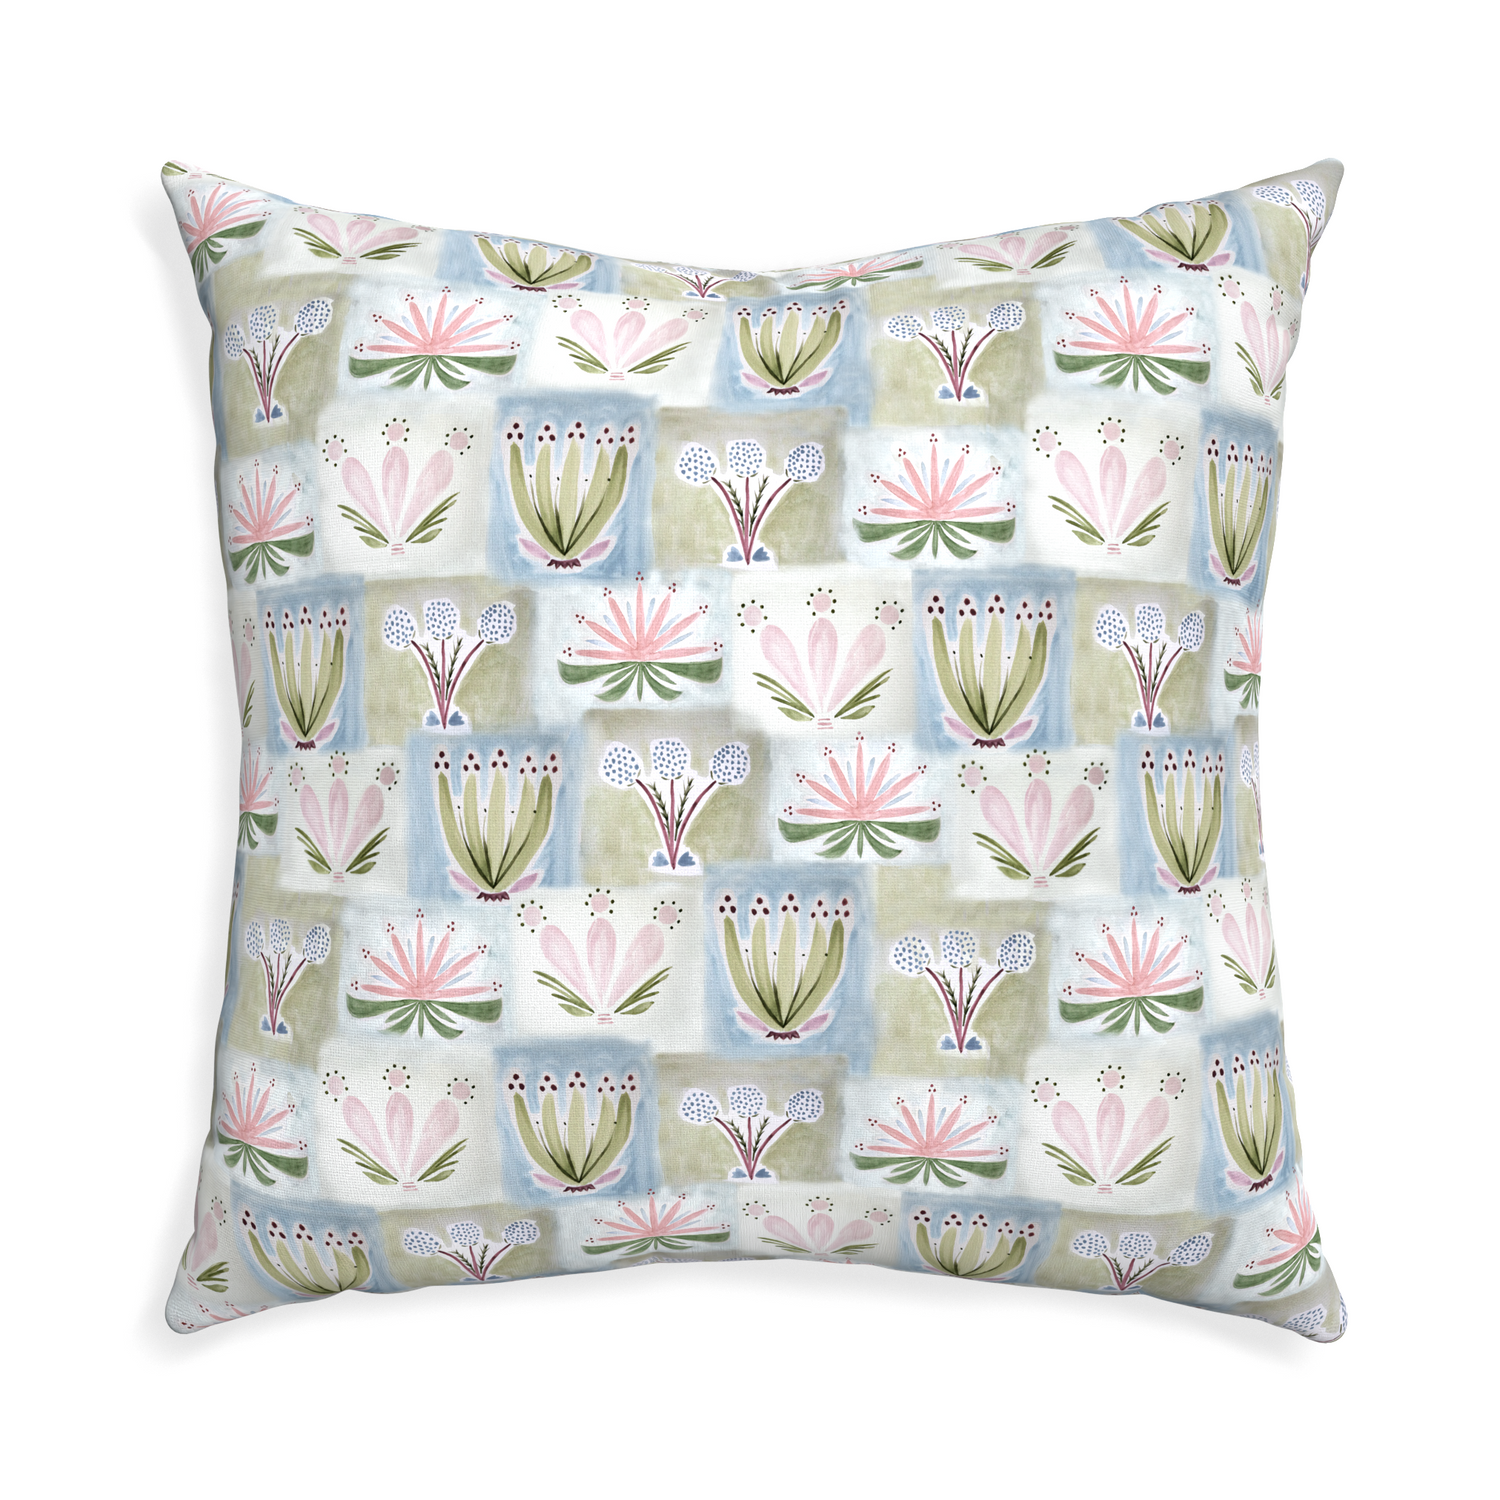 Euro-sham harper custom hand-painted floralpillow with none on white background